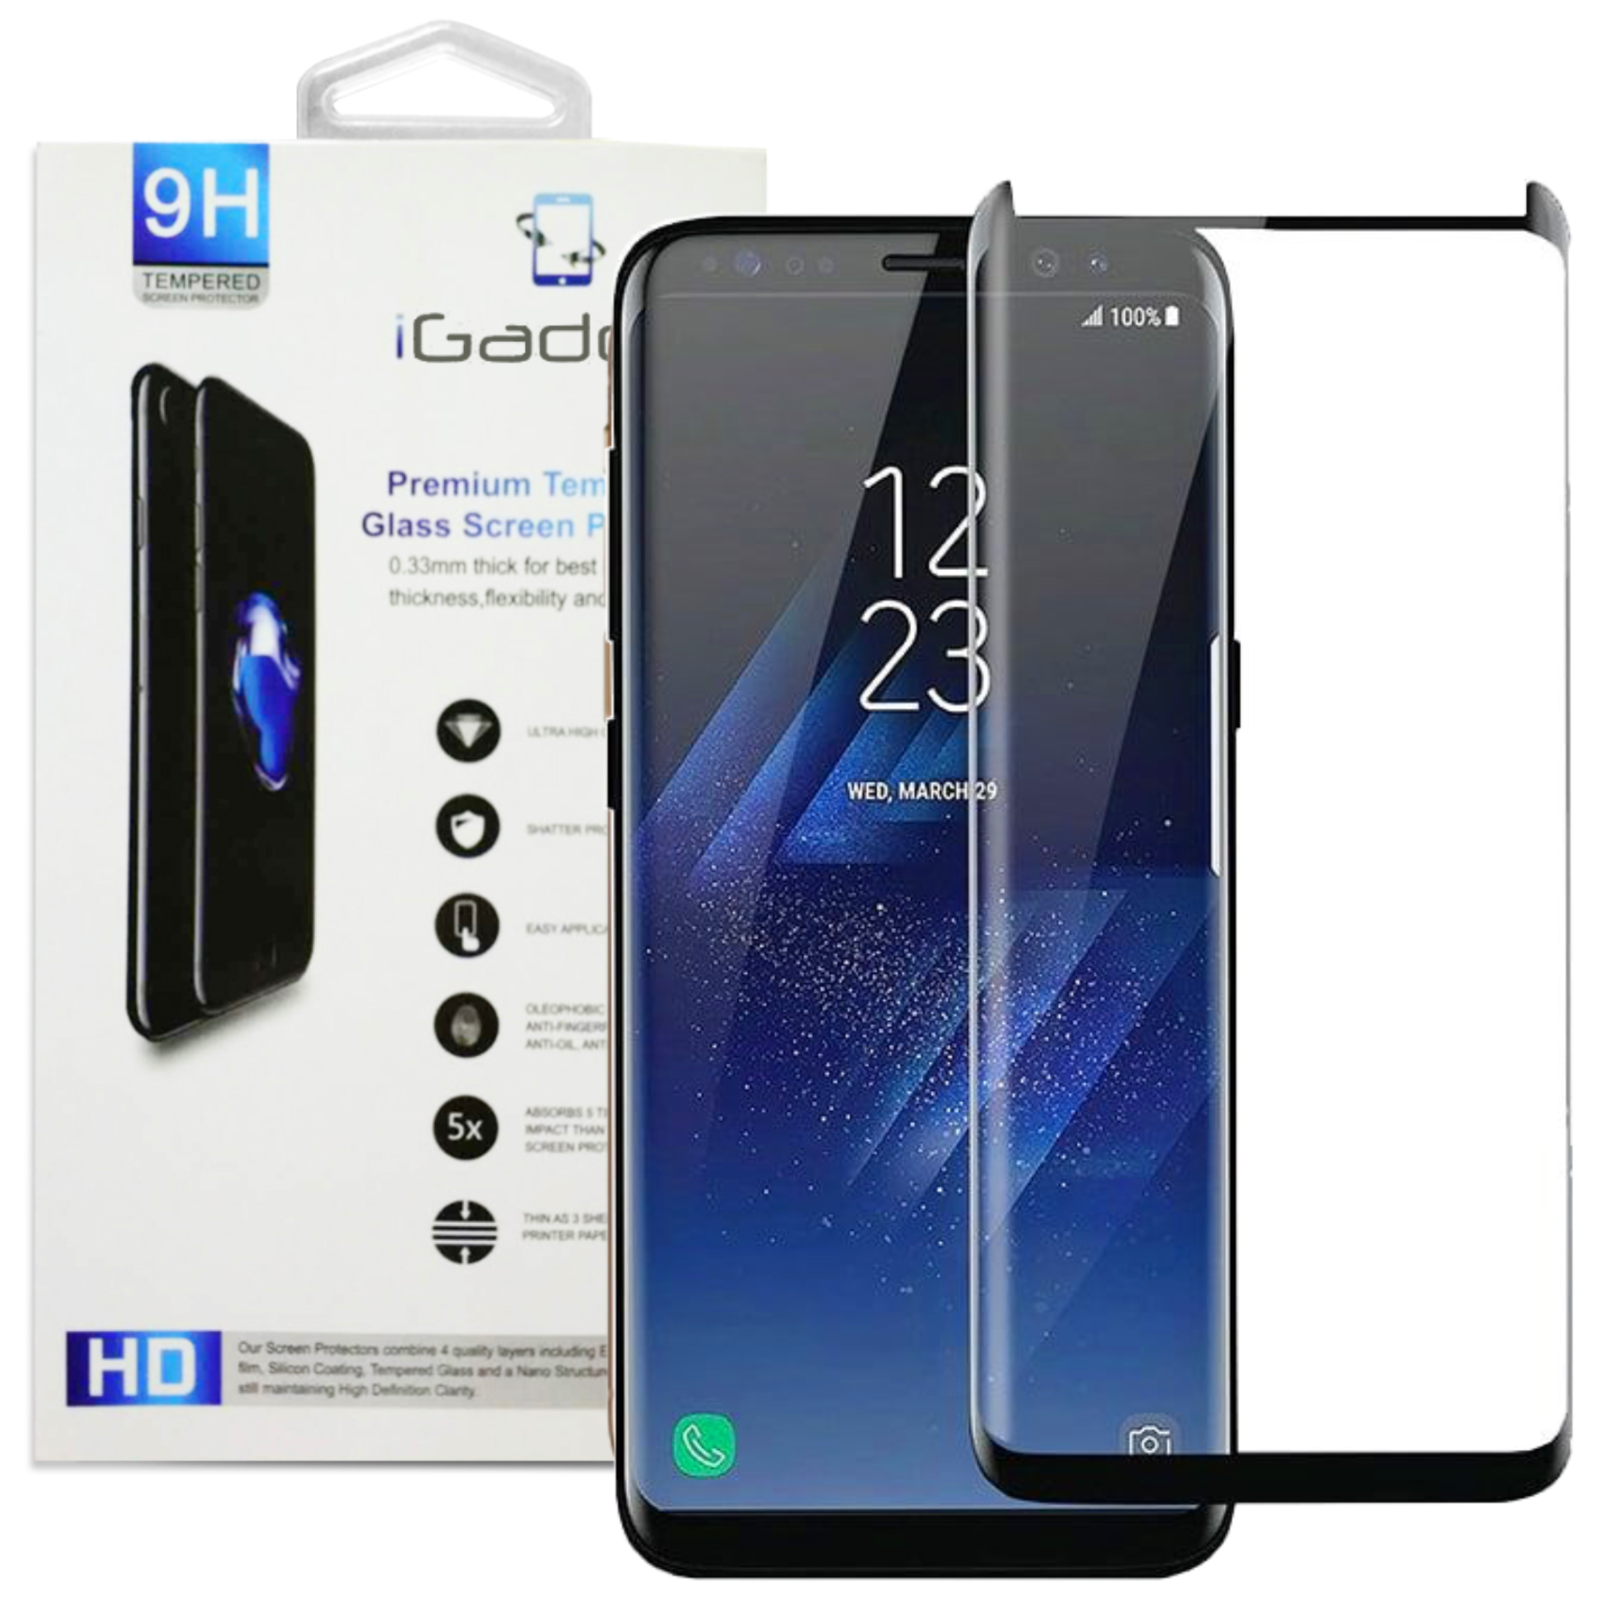 Samsung Galaxy S8 Plus Tempered Glass Screen Protector.